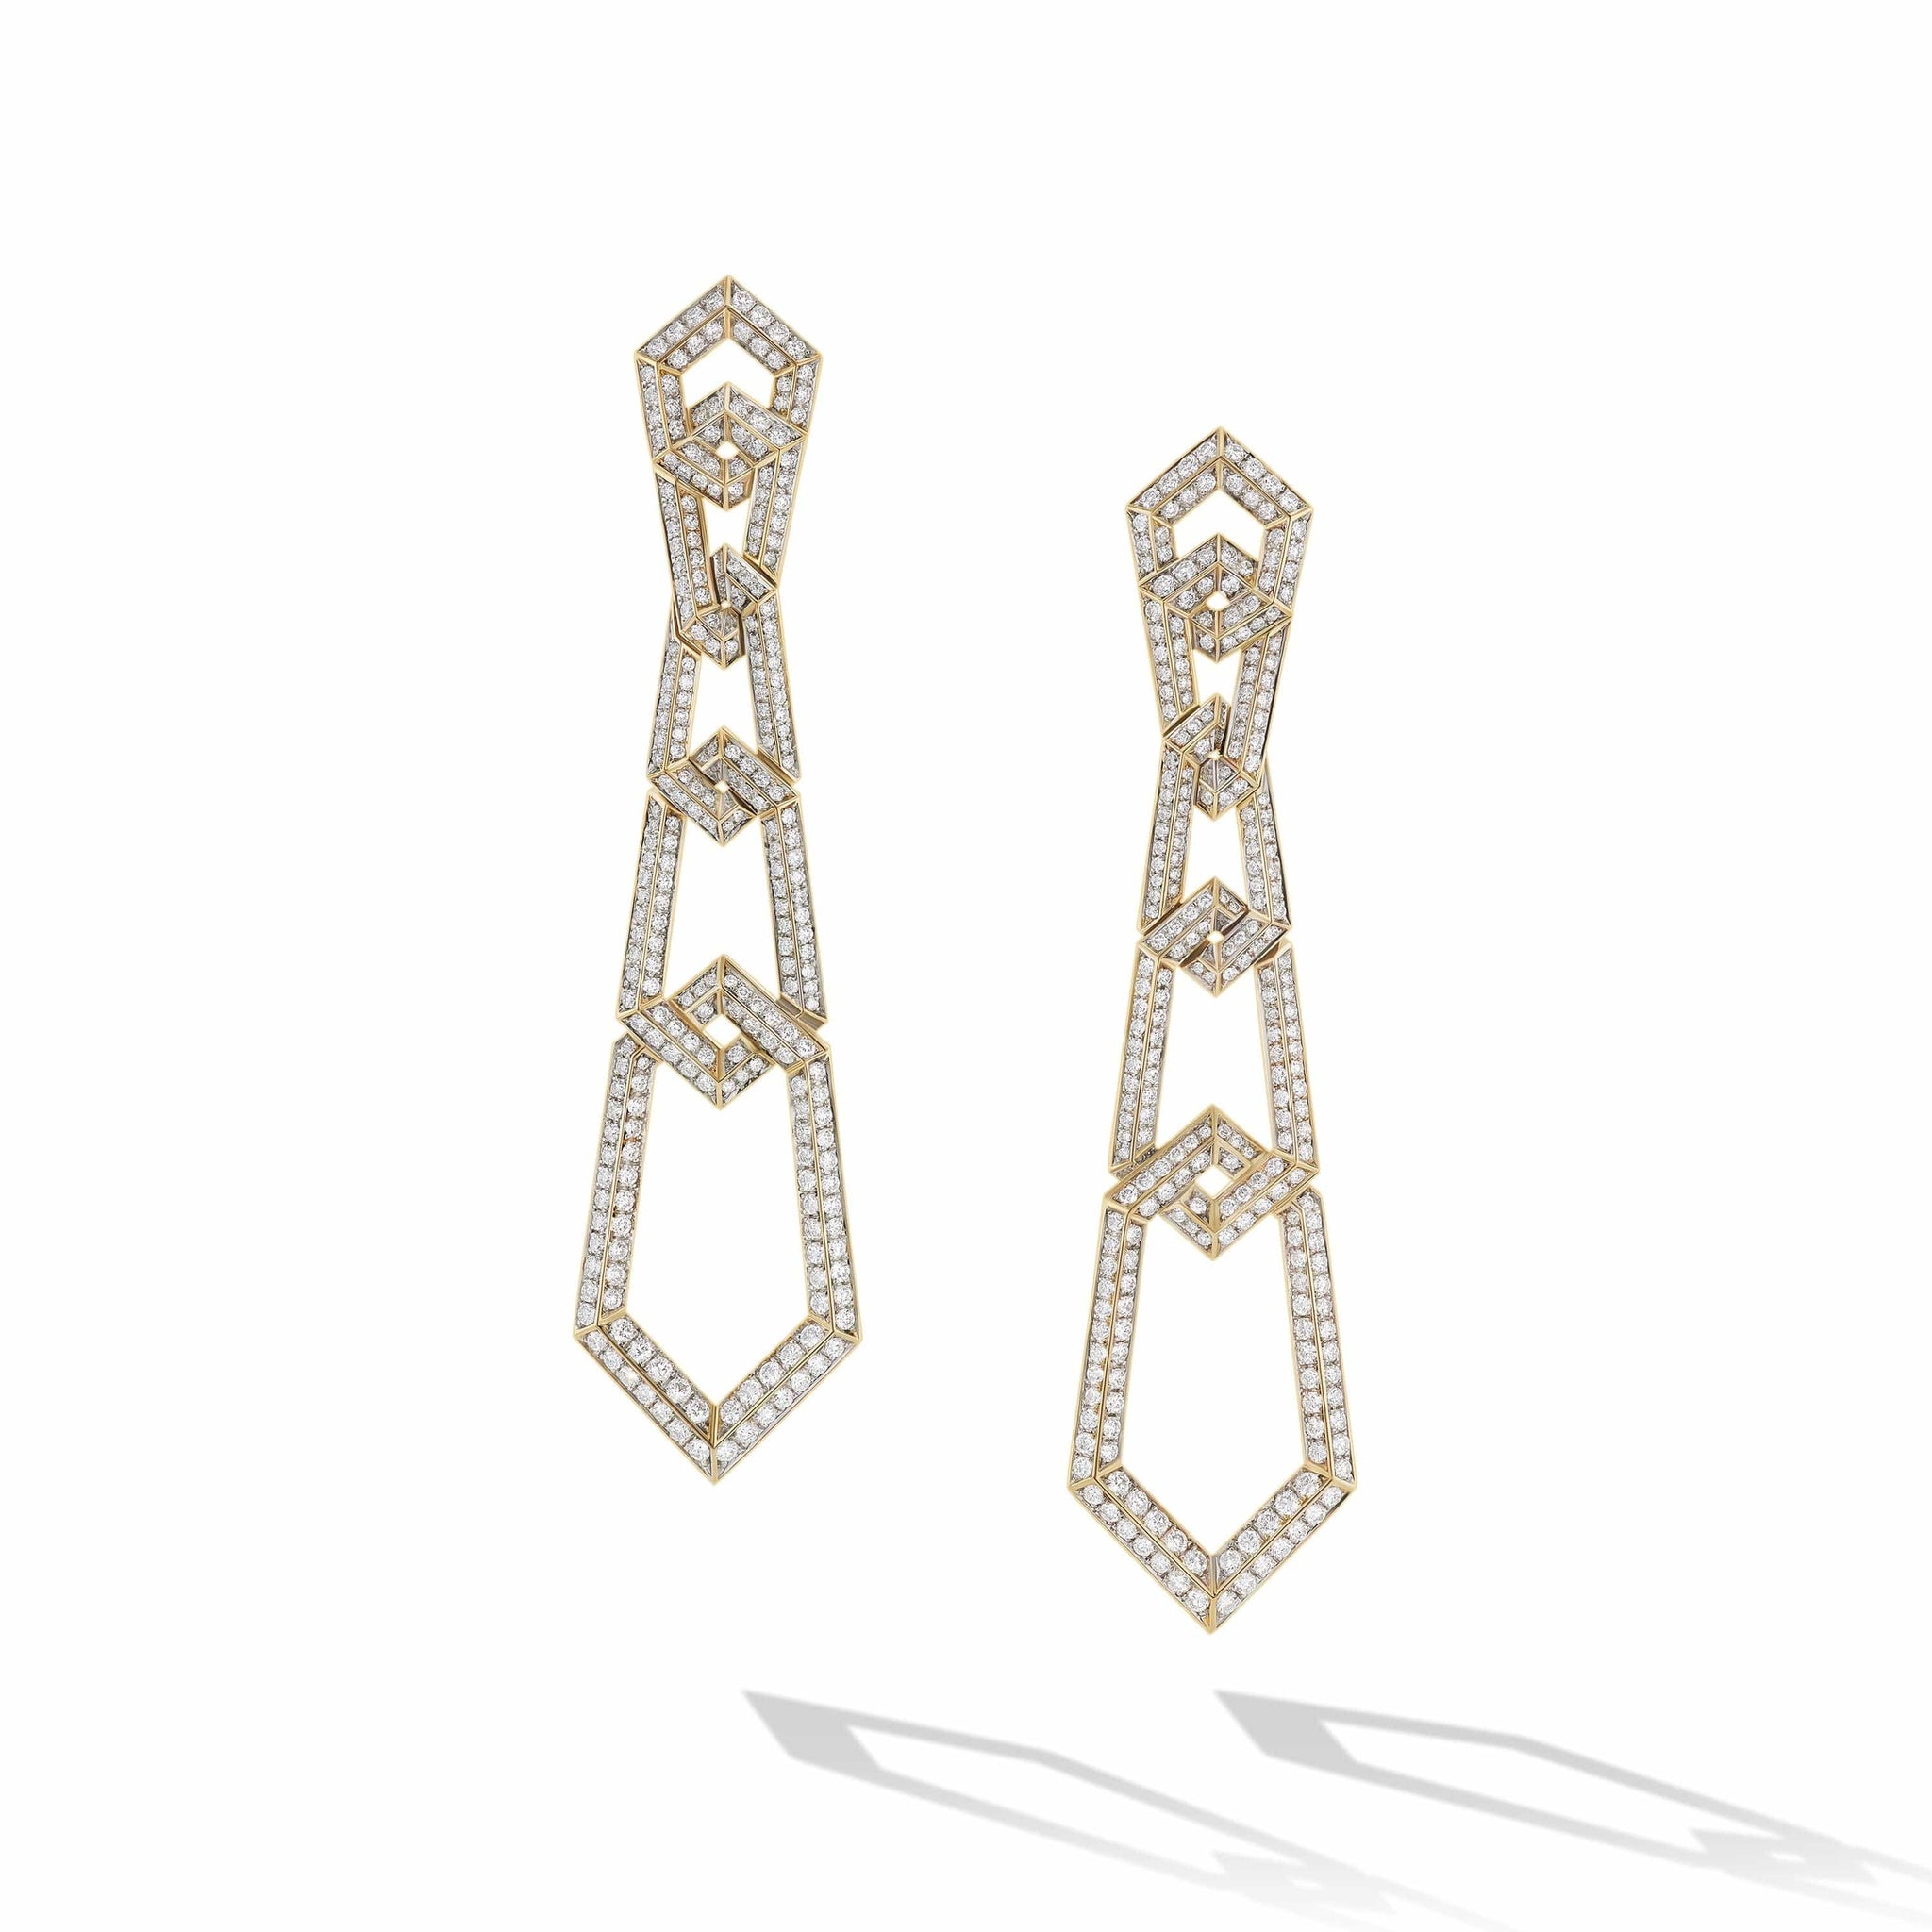 Carlyle Linked Drop Earrings in 18K Yellow Gold with Full Pavé Diamonds